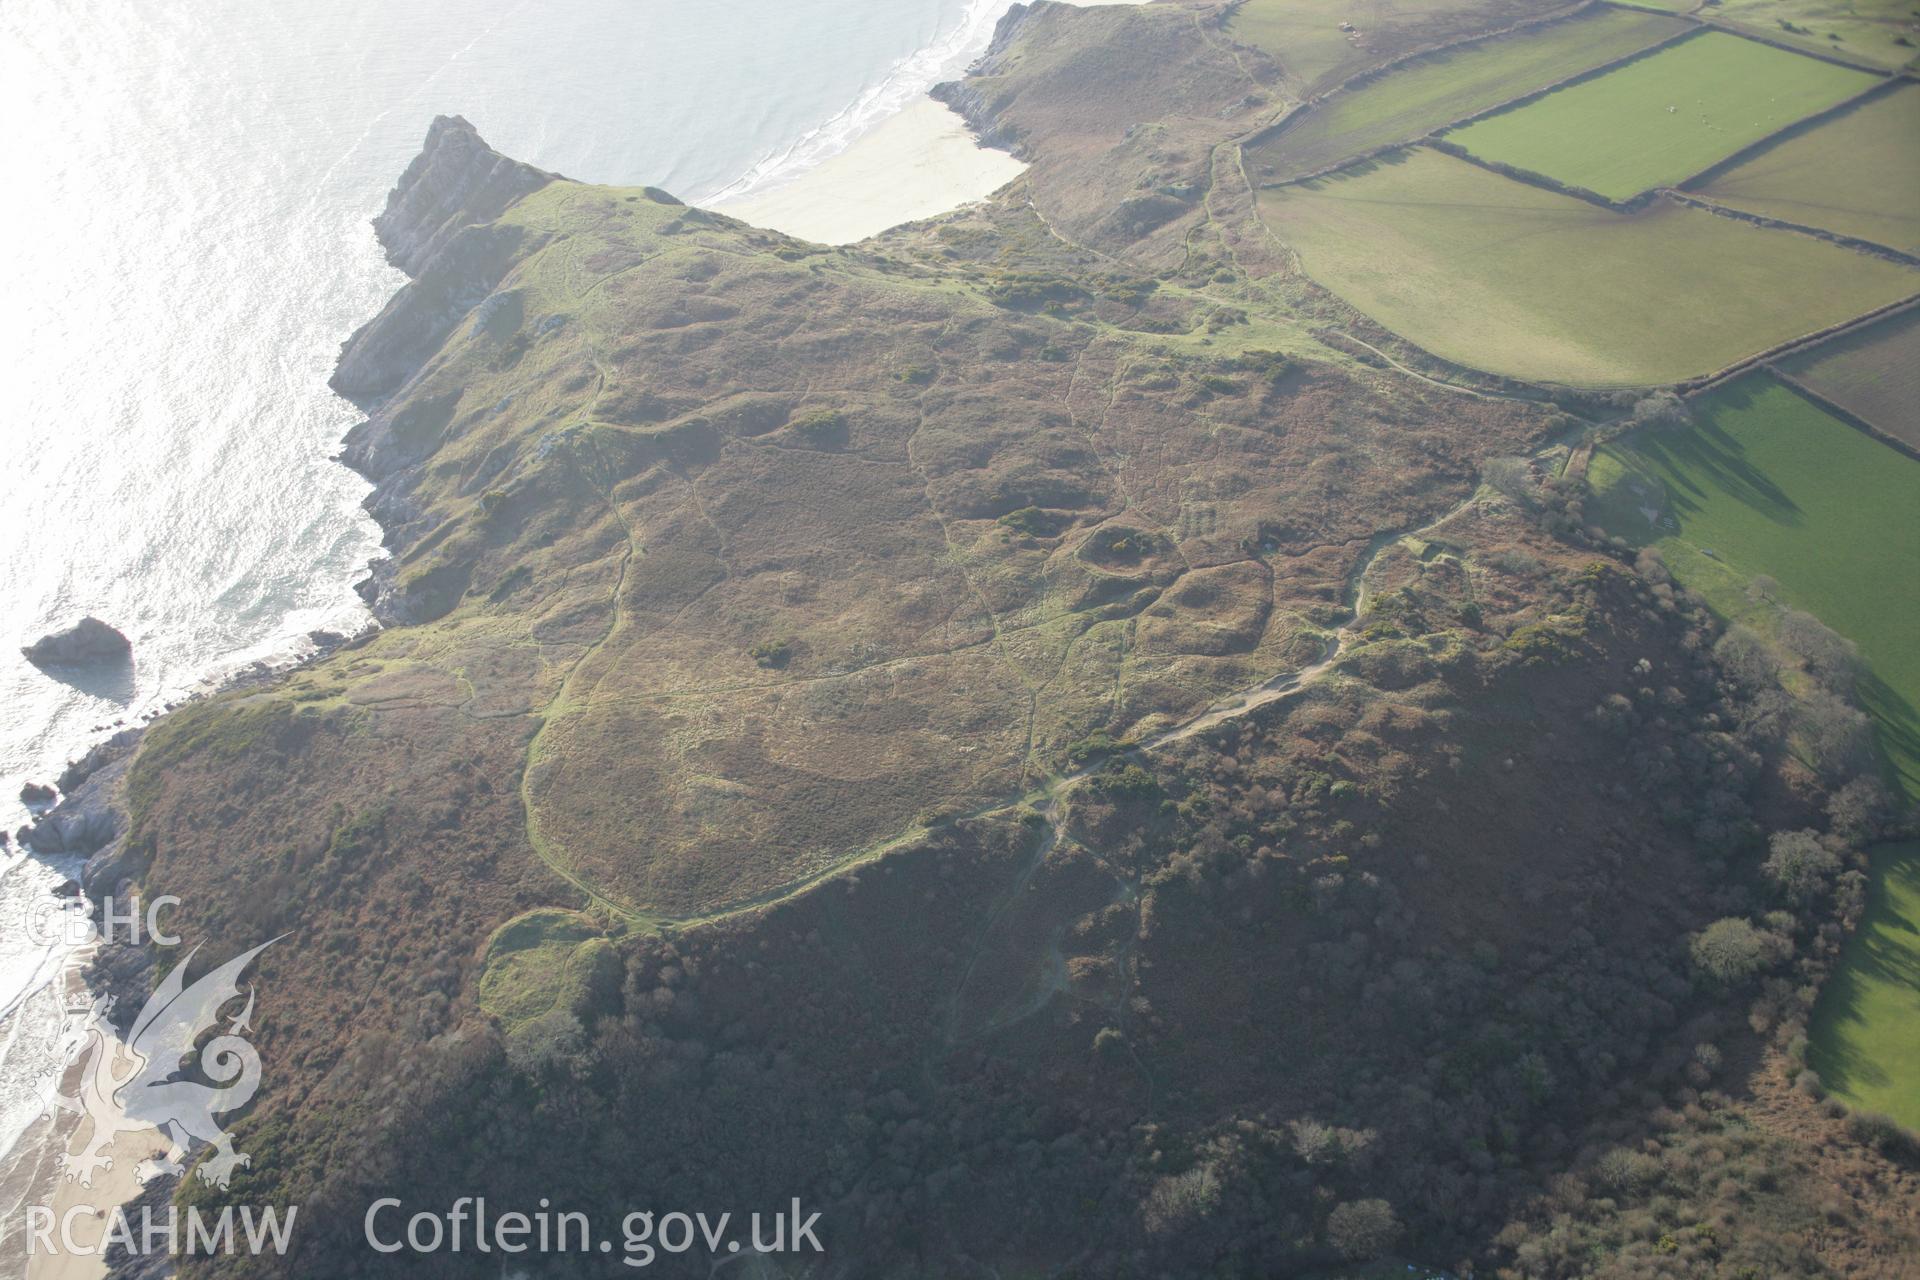 RCAHMW colour oblique aerial photograph of Castle Tower, Penmaen Burrows ringwork, wide view from the north-east. Taken on 26 January 2006 by Toby Driver